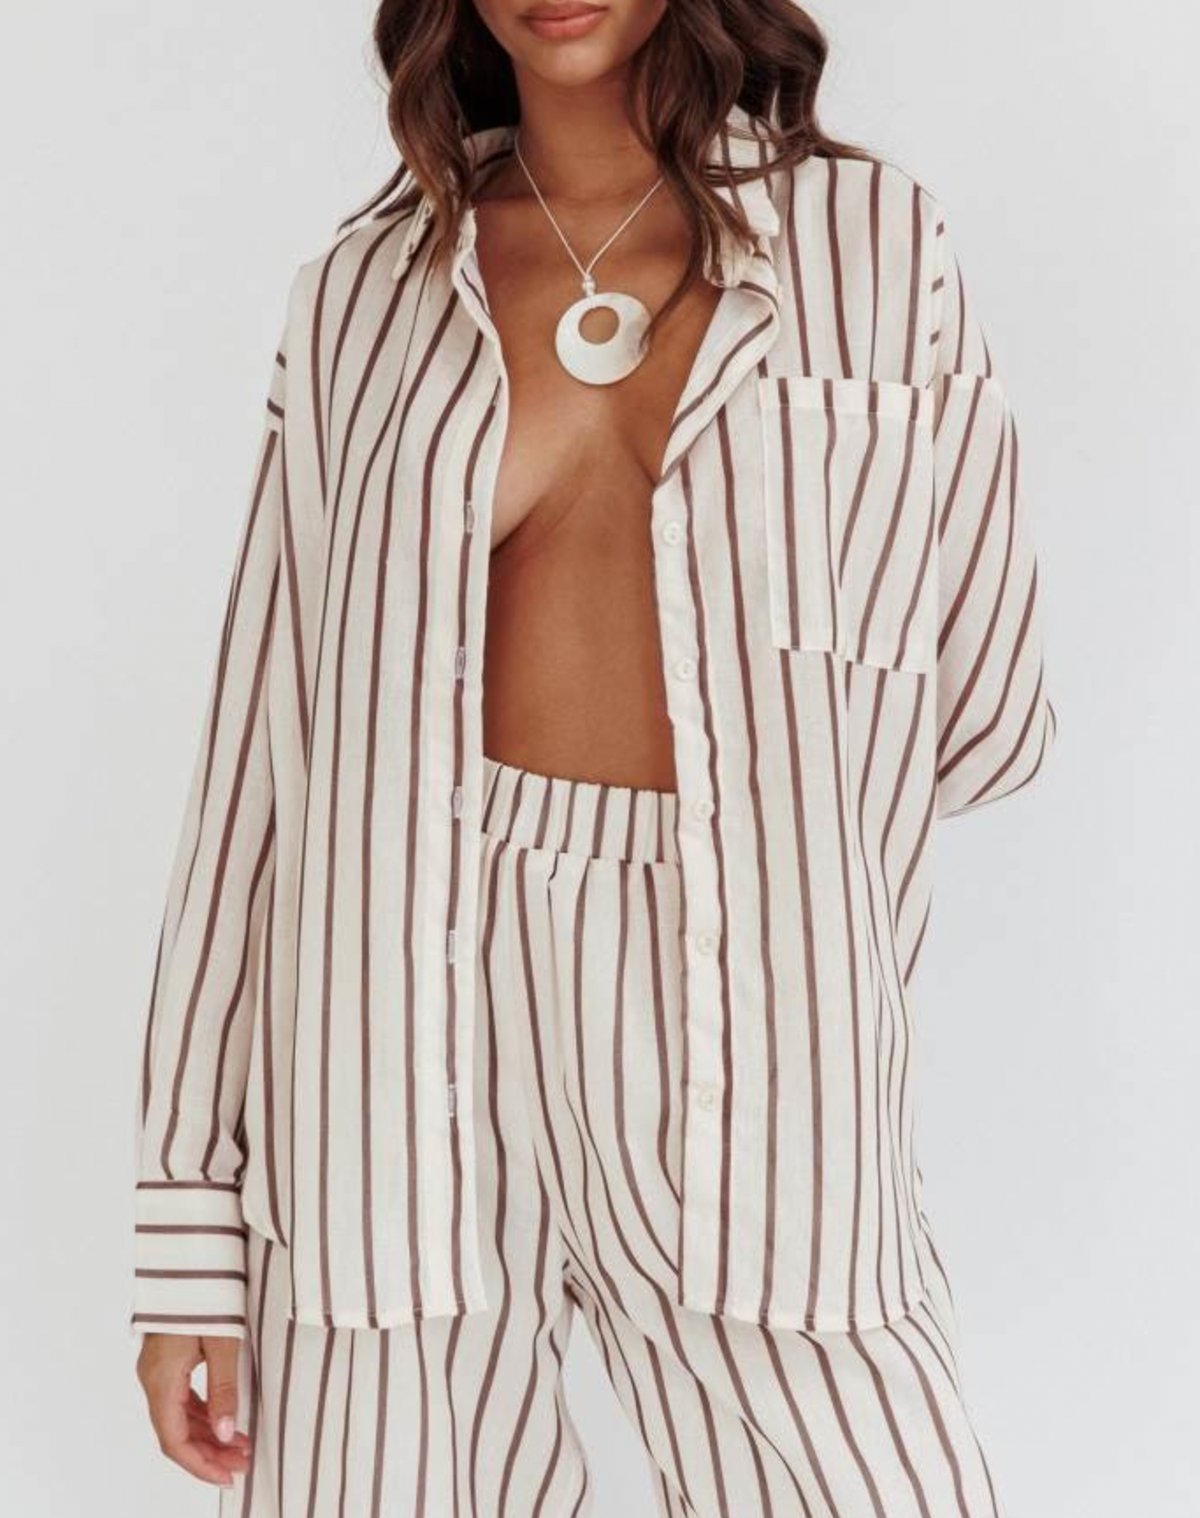 Complete your look with Latte Stripe Set: Oversized fit top and elastic waist pants.